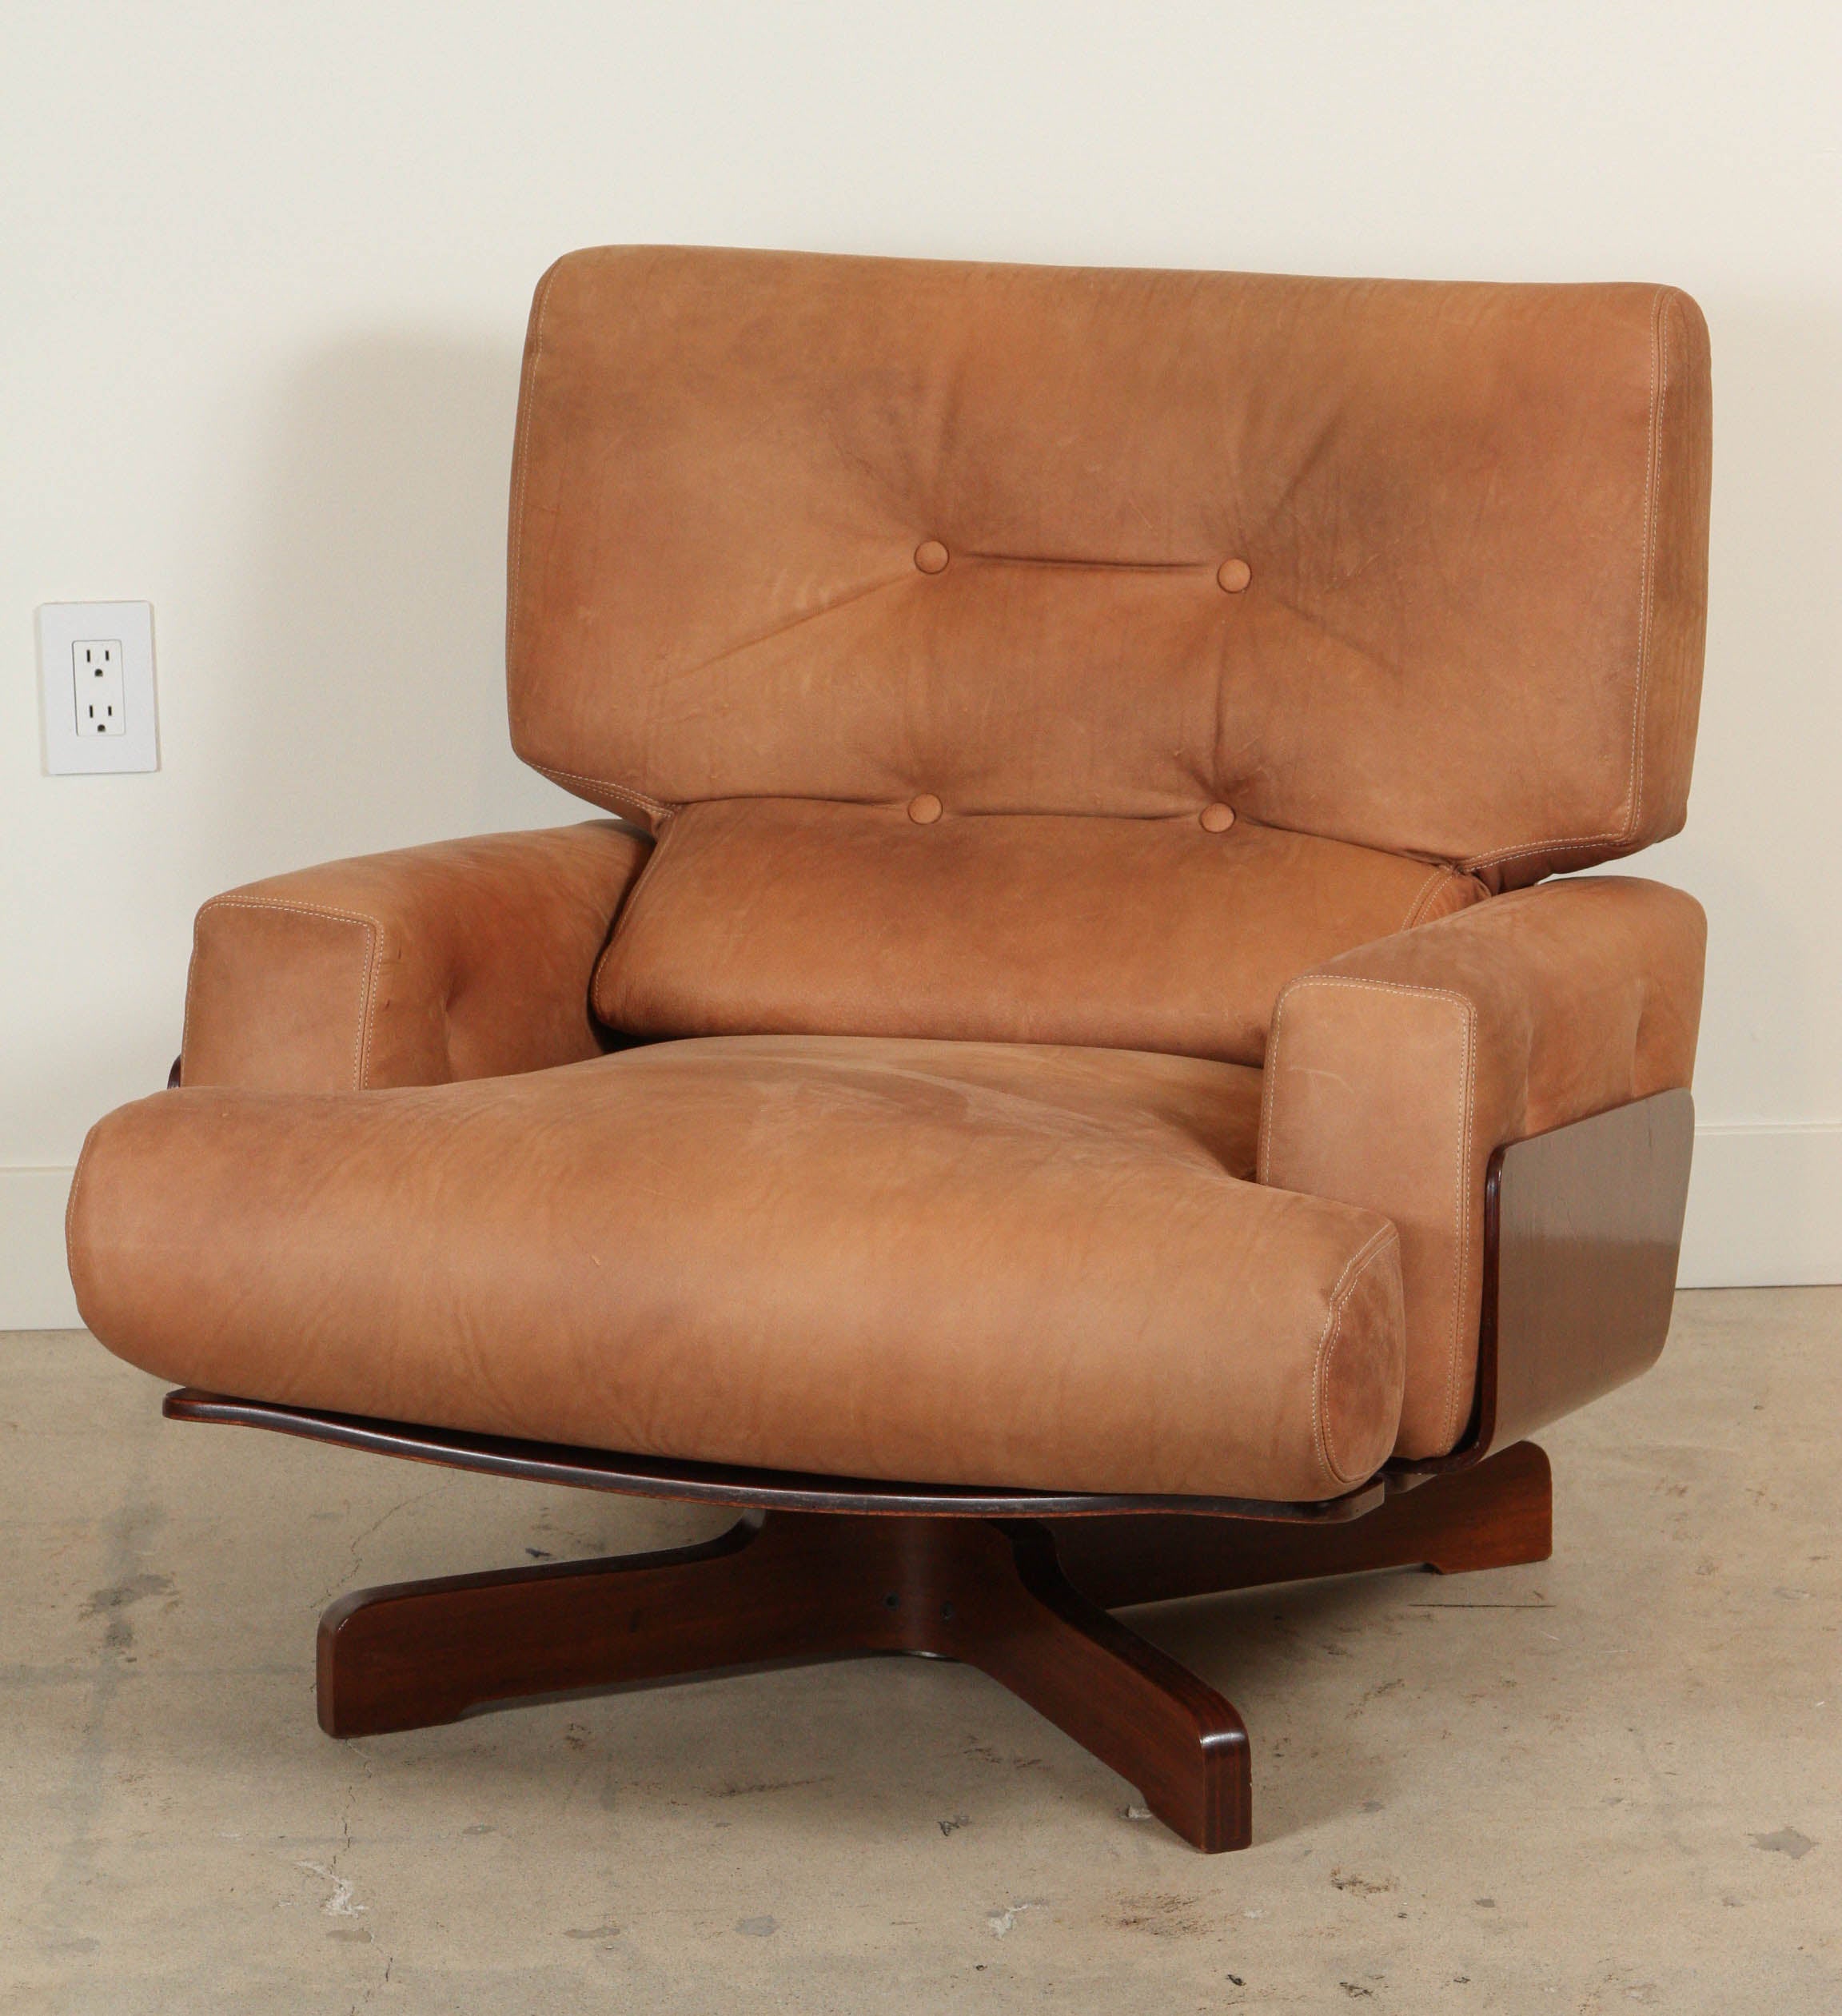 Molded Rosewood and Leather Swivel Chair by M. Taro for Cinova